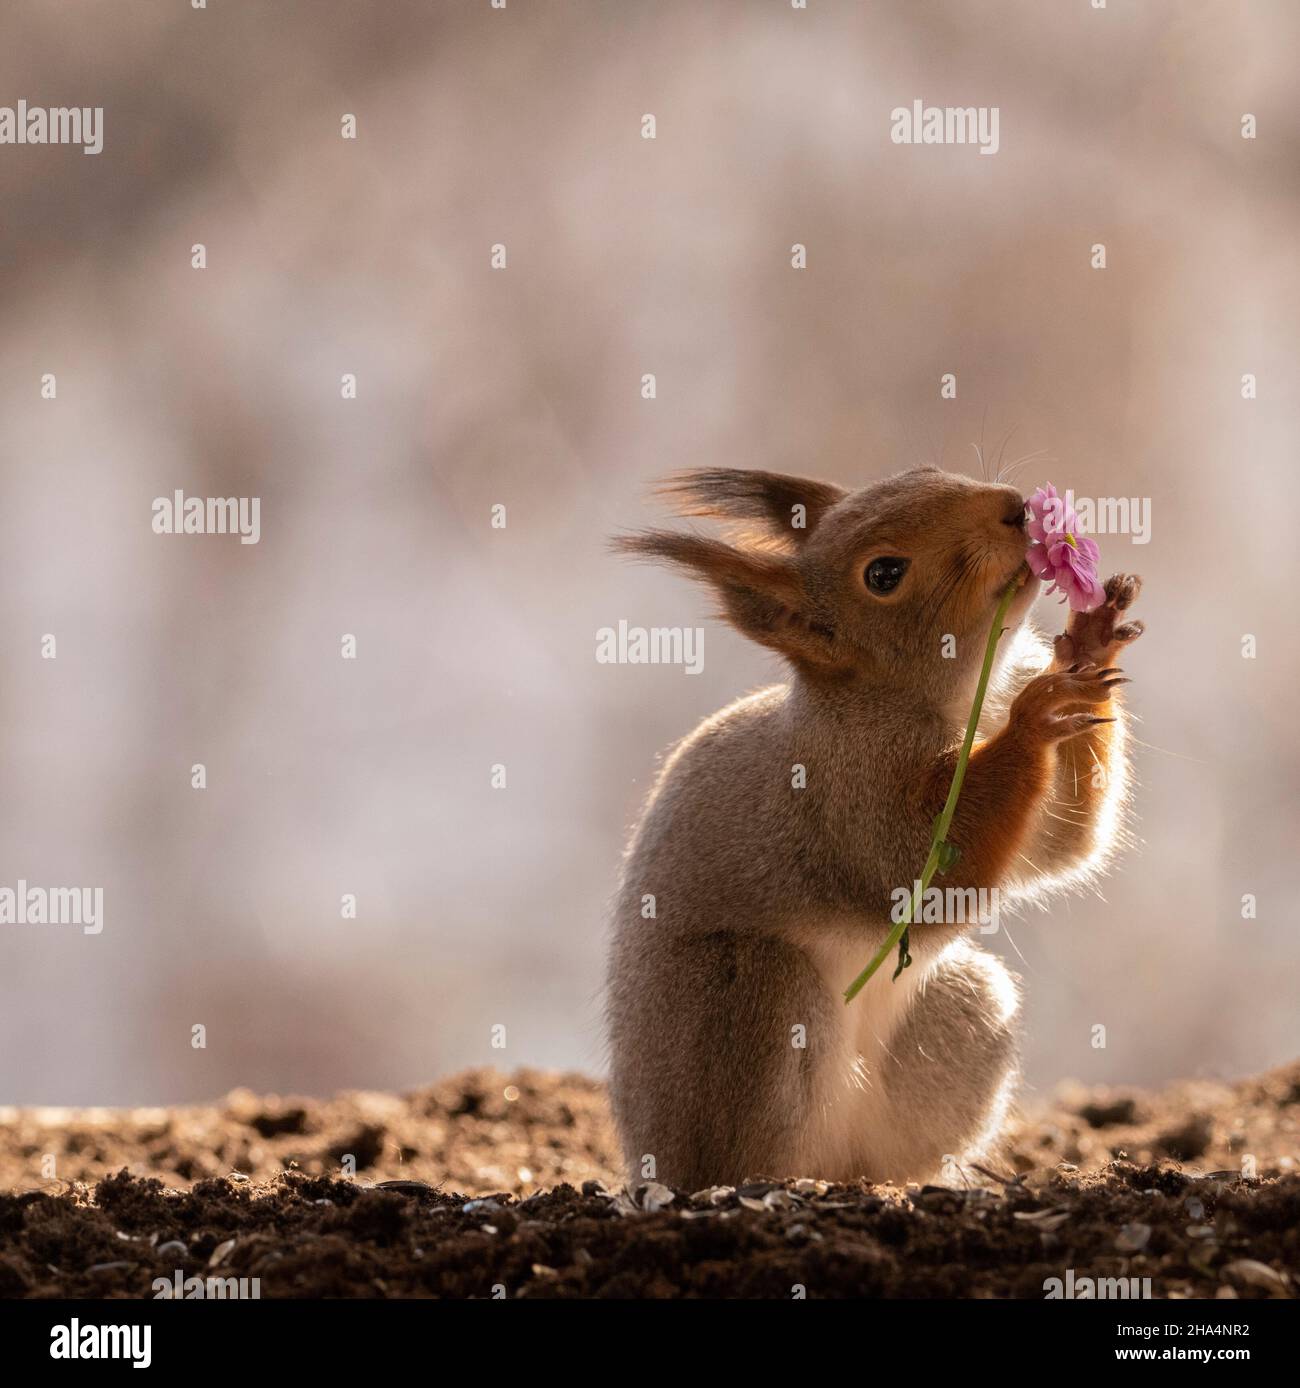 red squirrel holding an pink daisy in mouth Stock Photo